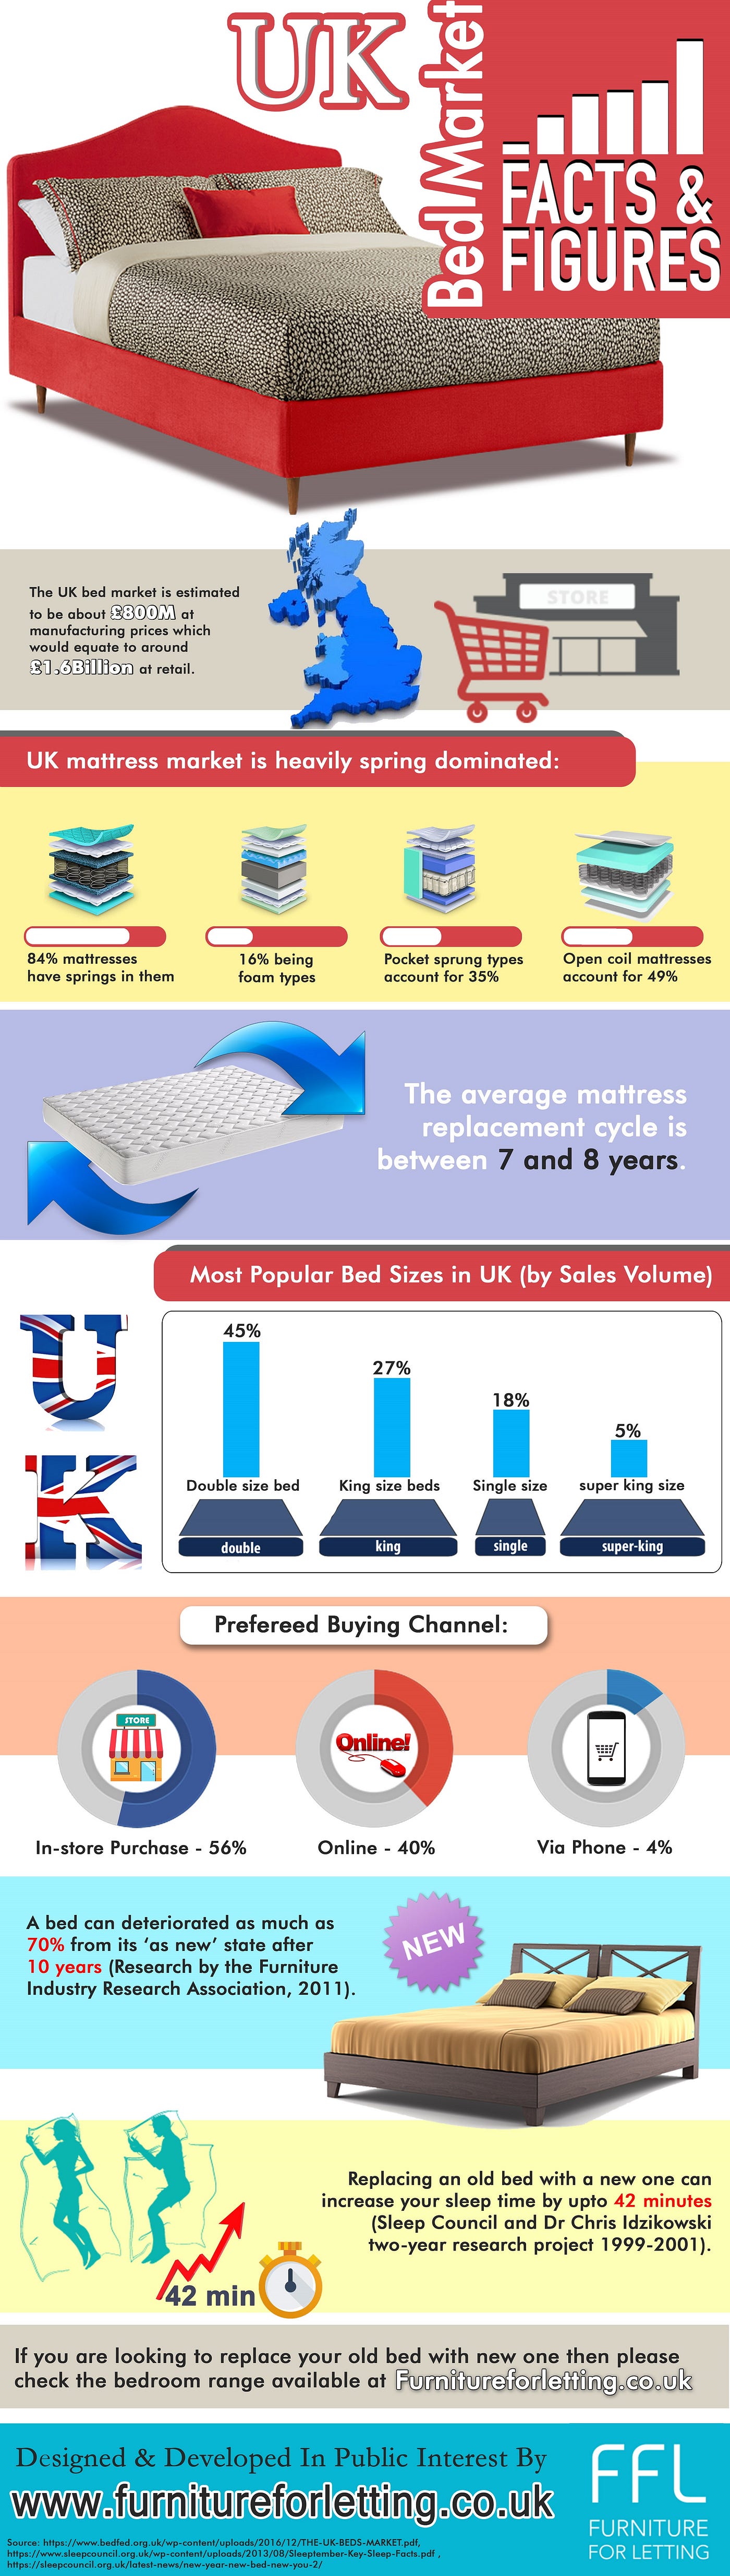 Uk Bed Market Facts And Figures This Infographic Provide Information On By Furniture For Letting Medium